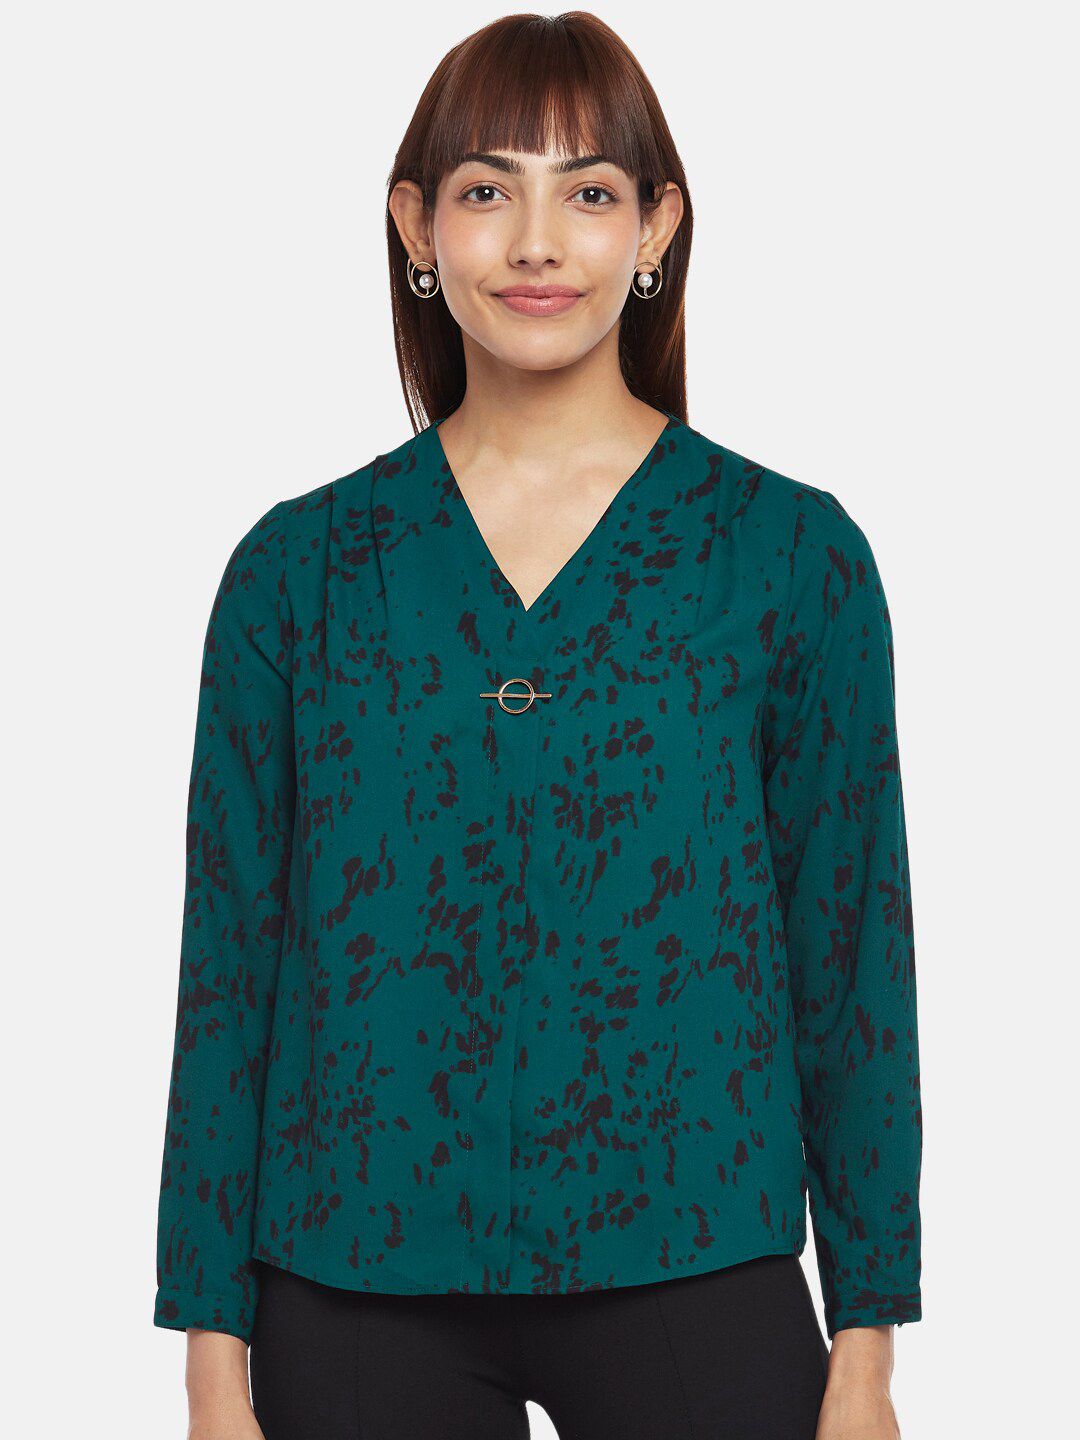 Annabelle by Pantaloons Women Green And Black Abstract Print V Neck Long Sleeves Top Price in India